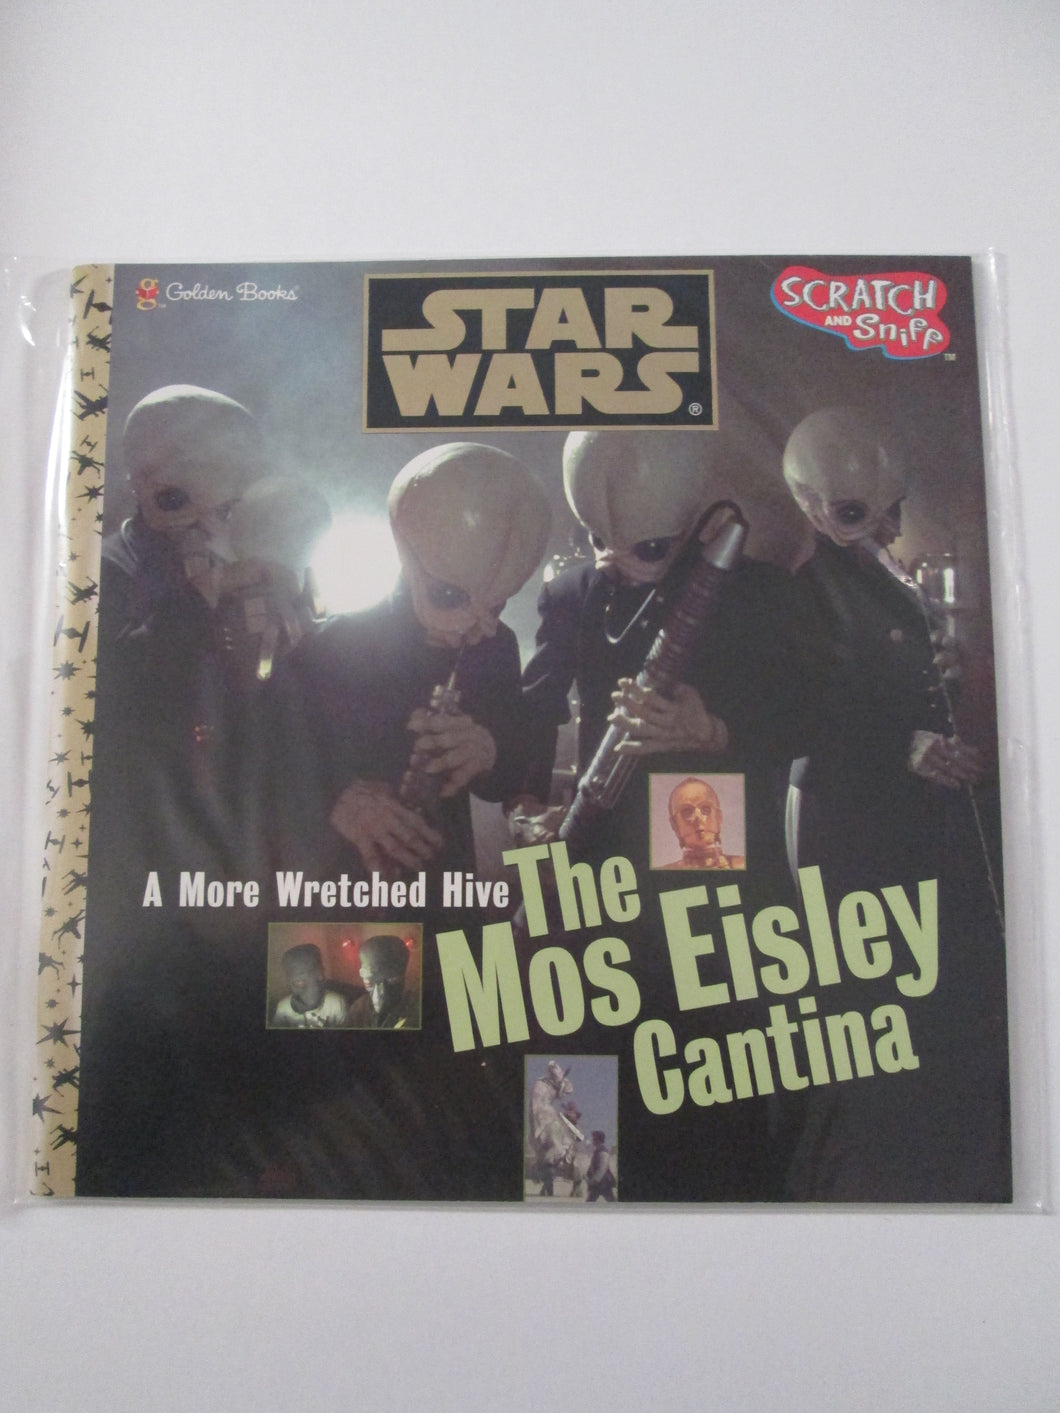 Star Wars The Mos Eisley Cantina Scratch & Sniff Golden Book 1997